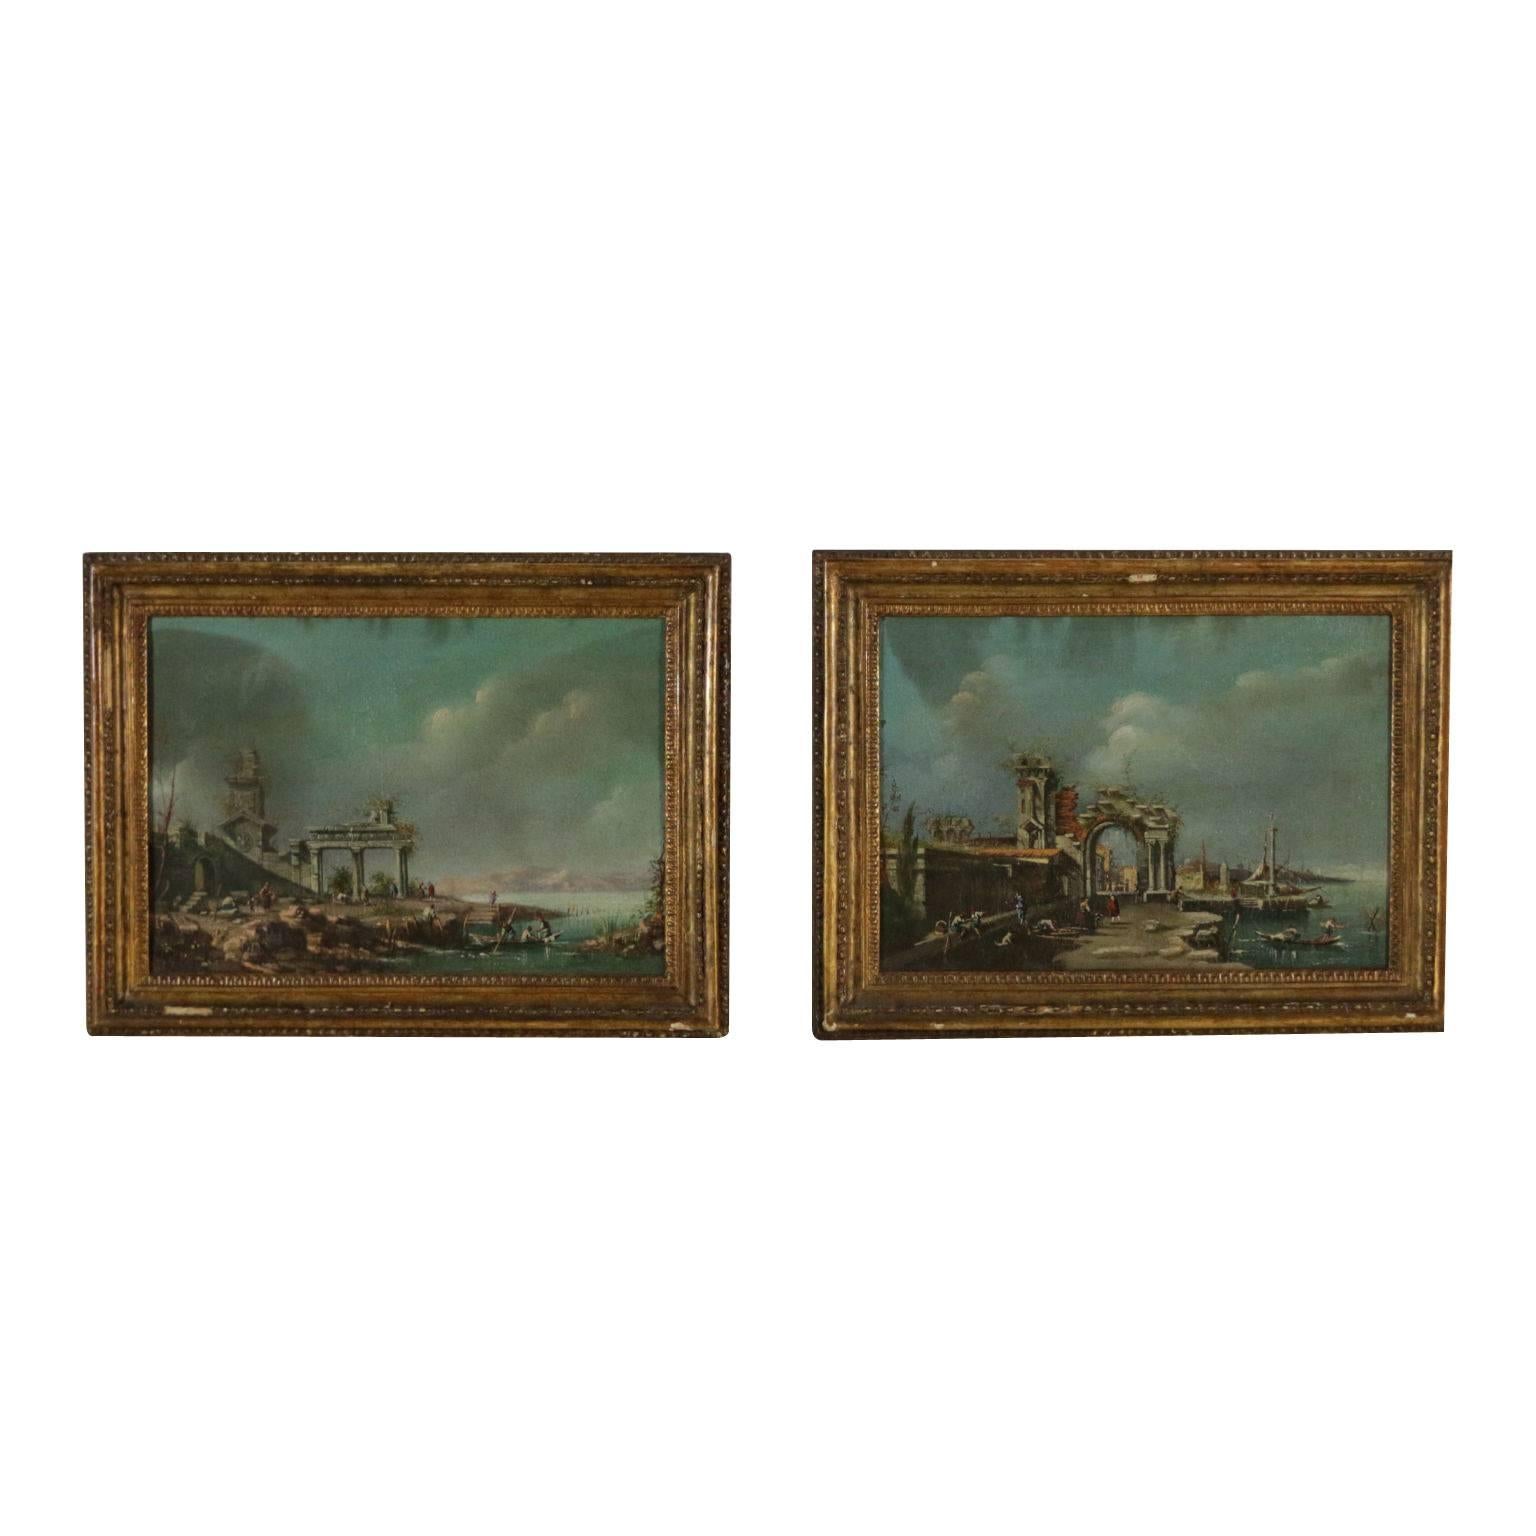 Unknown Landscape Painting - Pair of Paintings with Ruins and Figures Venetian School 19th Century